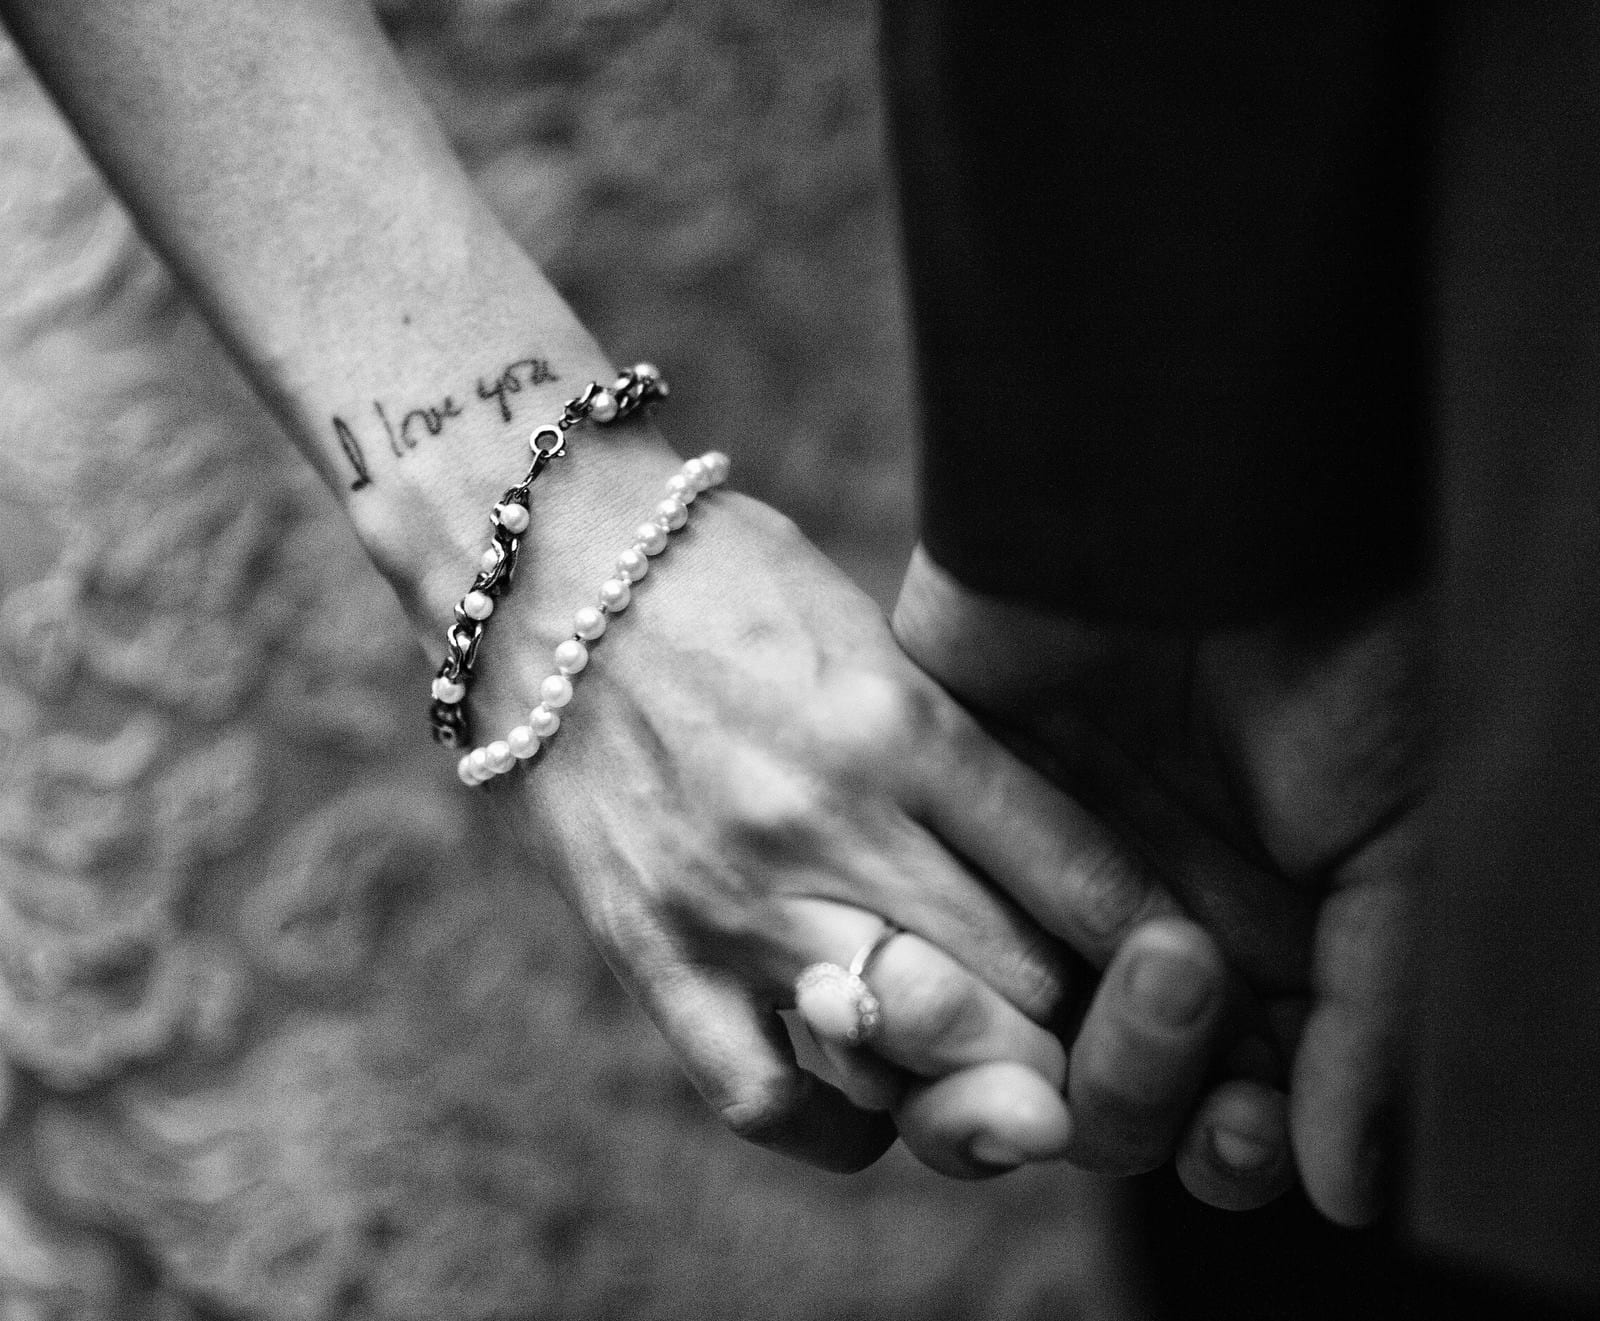 A closeup of a bride and groom holding hands shows a tattoo on her wrist that says "I love you"